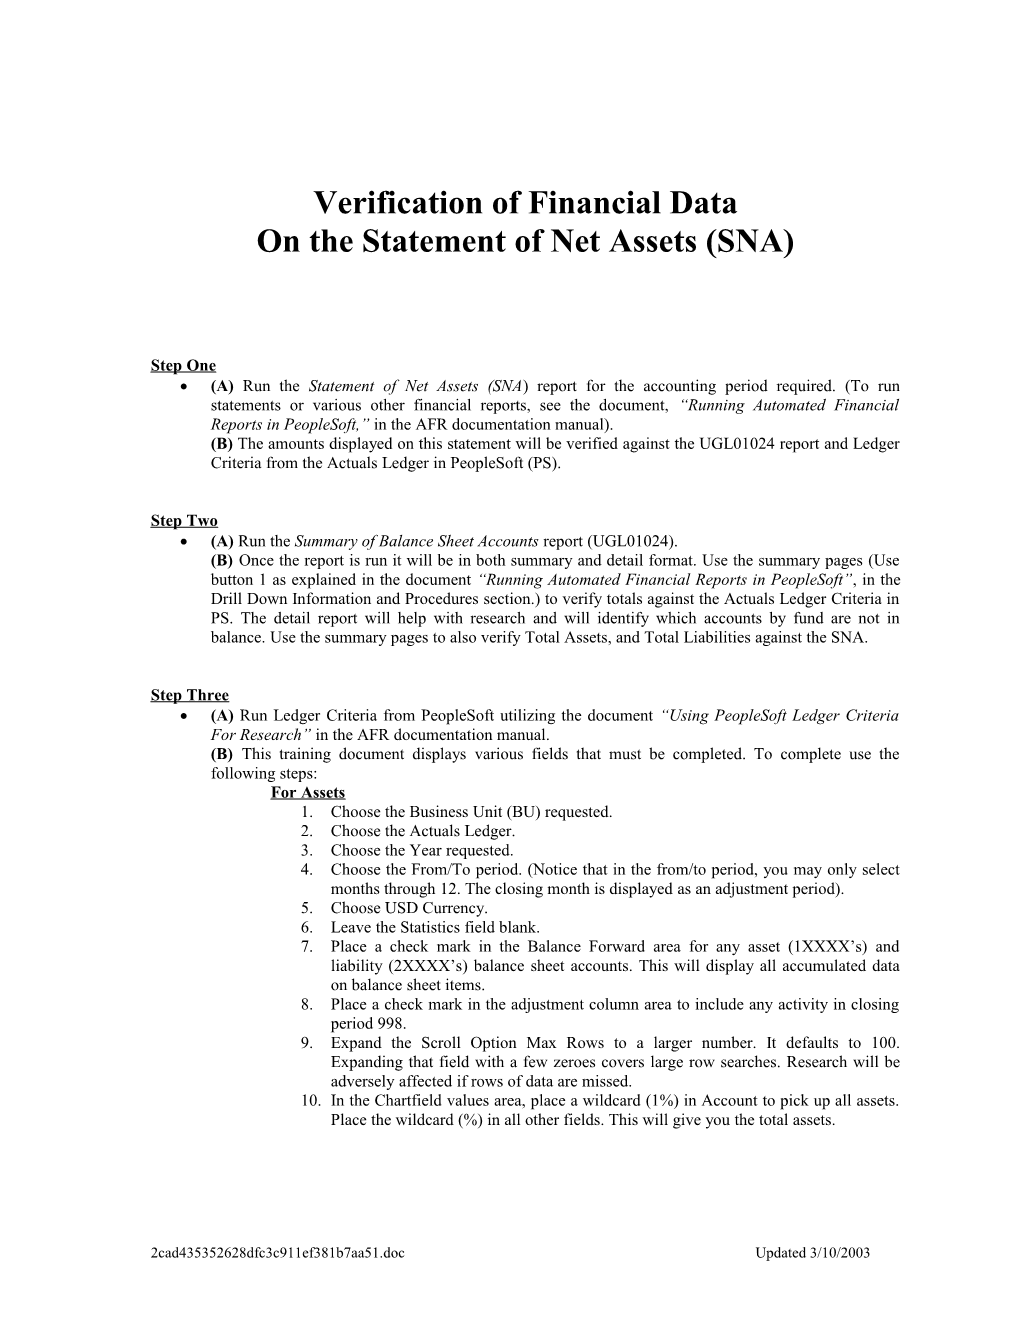 Verification of Financial Data on the Statement of Net Assets